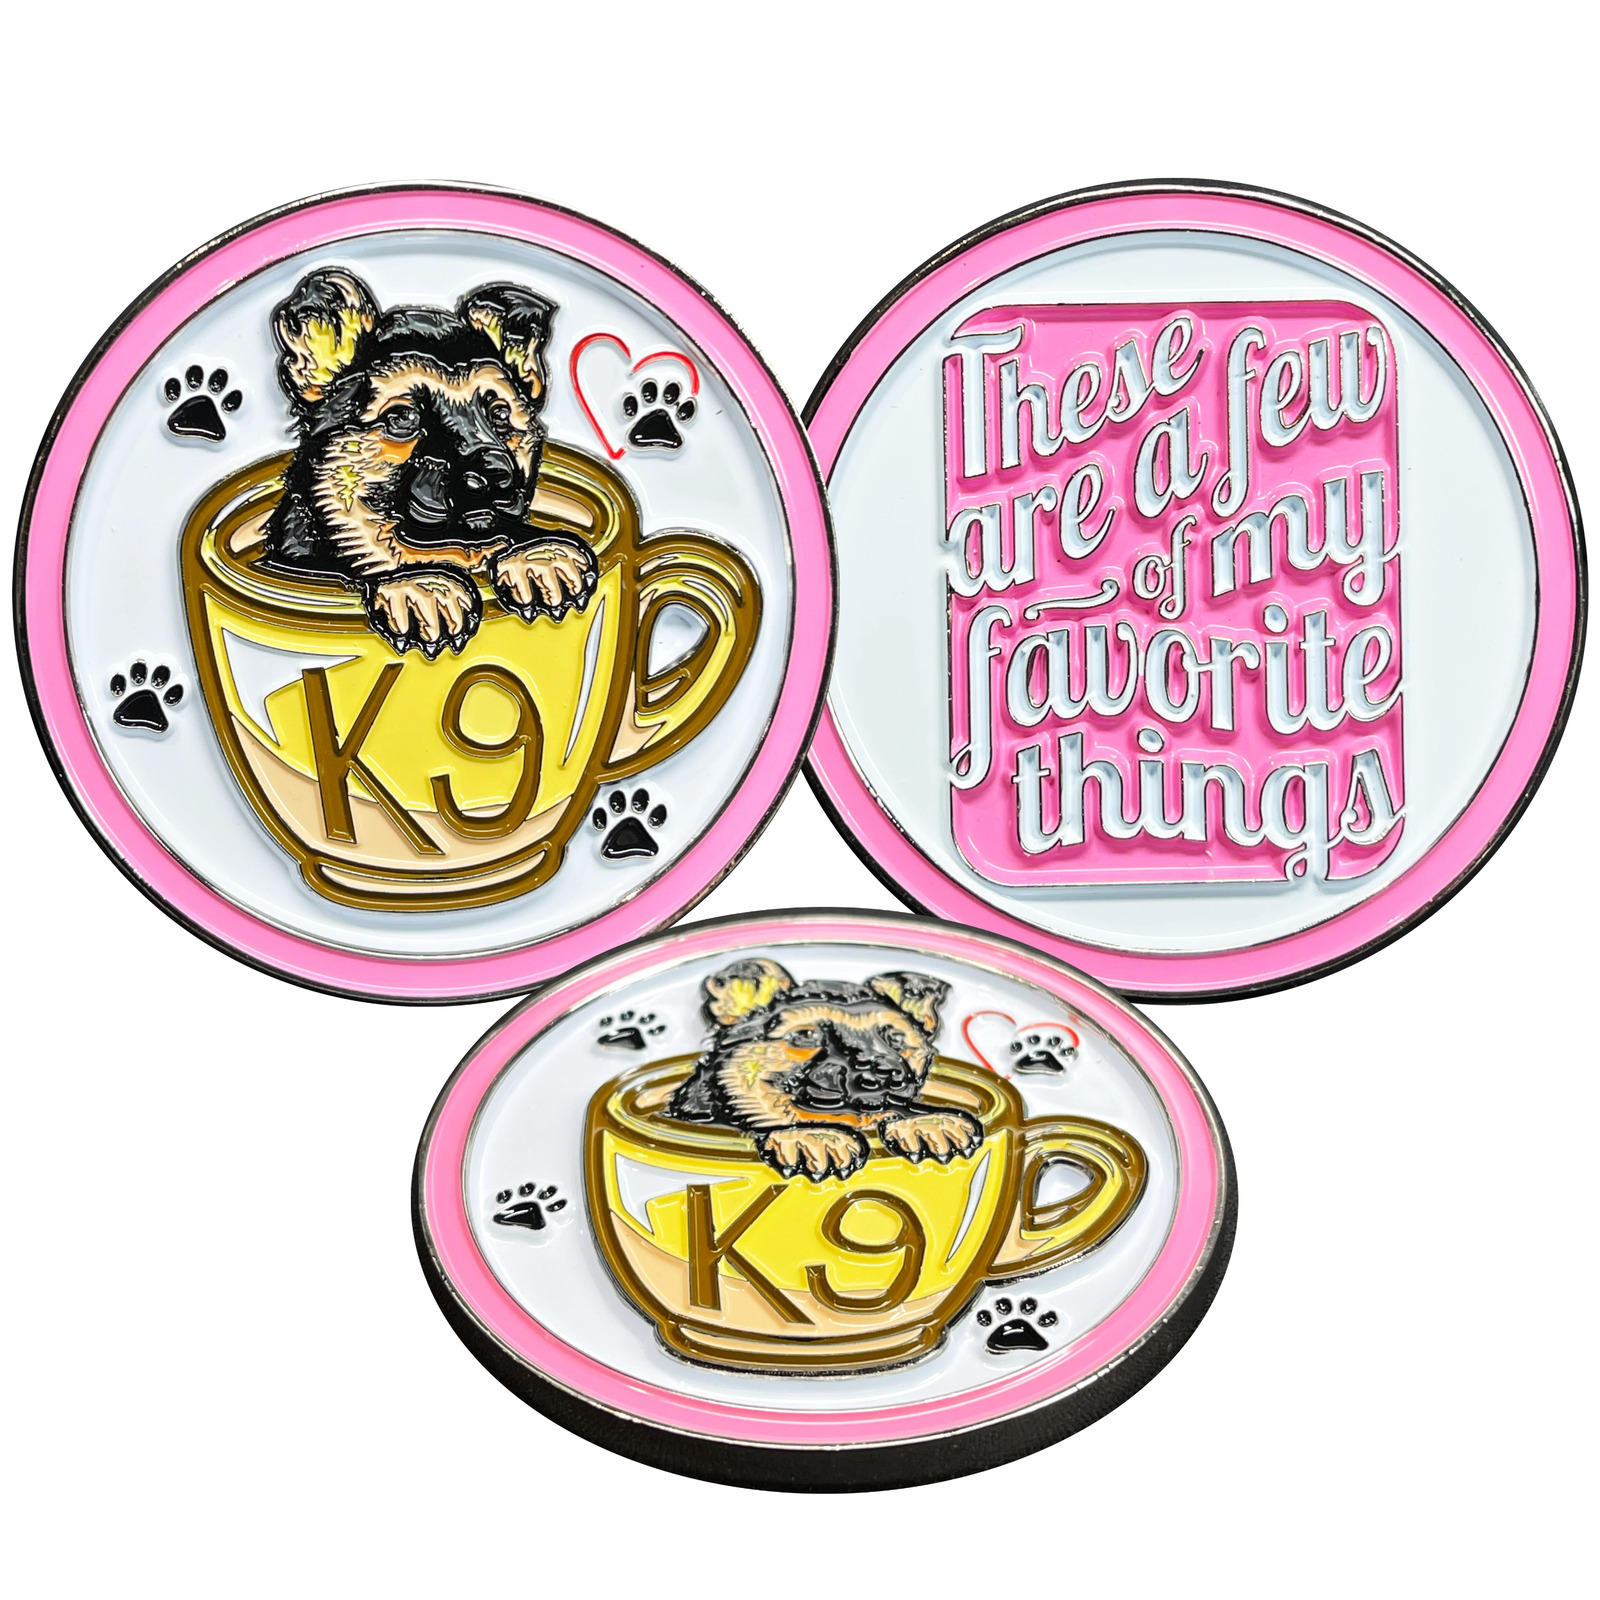 BL14-004 Cute PINK K9 Puppy in coffee mug canine challenge coin police service d